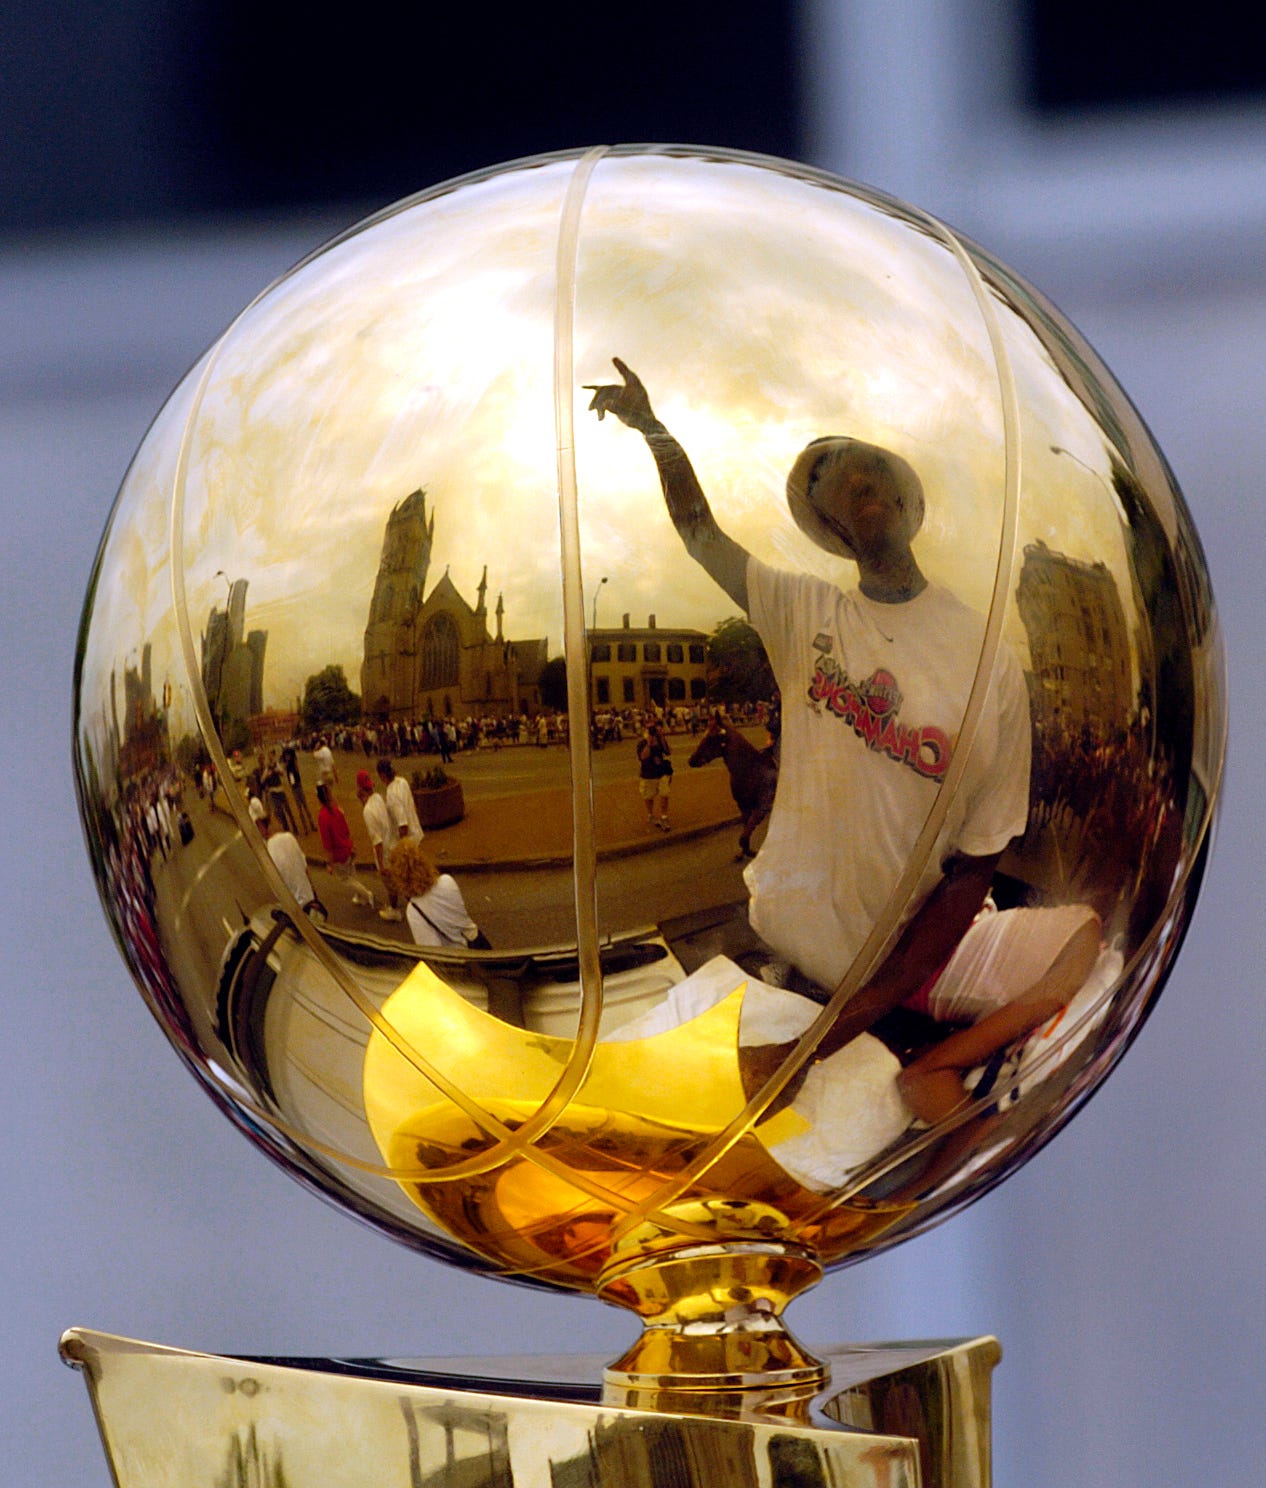 Ben Wallace is reflected in the NBA championship trophy during the parade on Thursday, June 17, 2004.